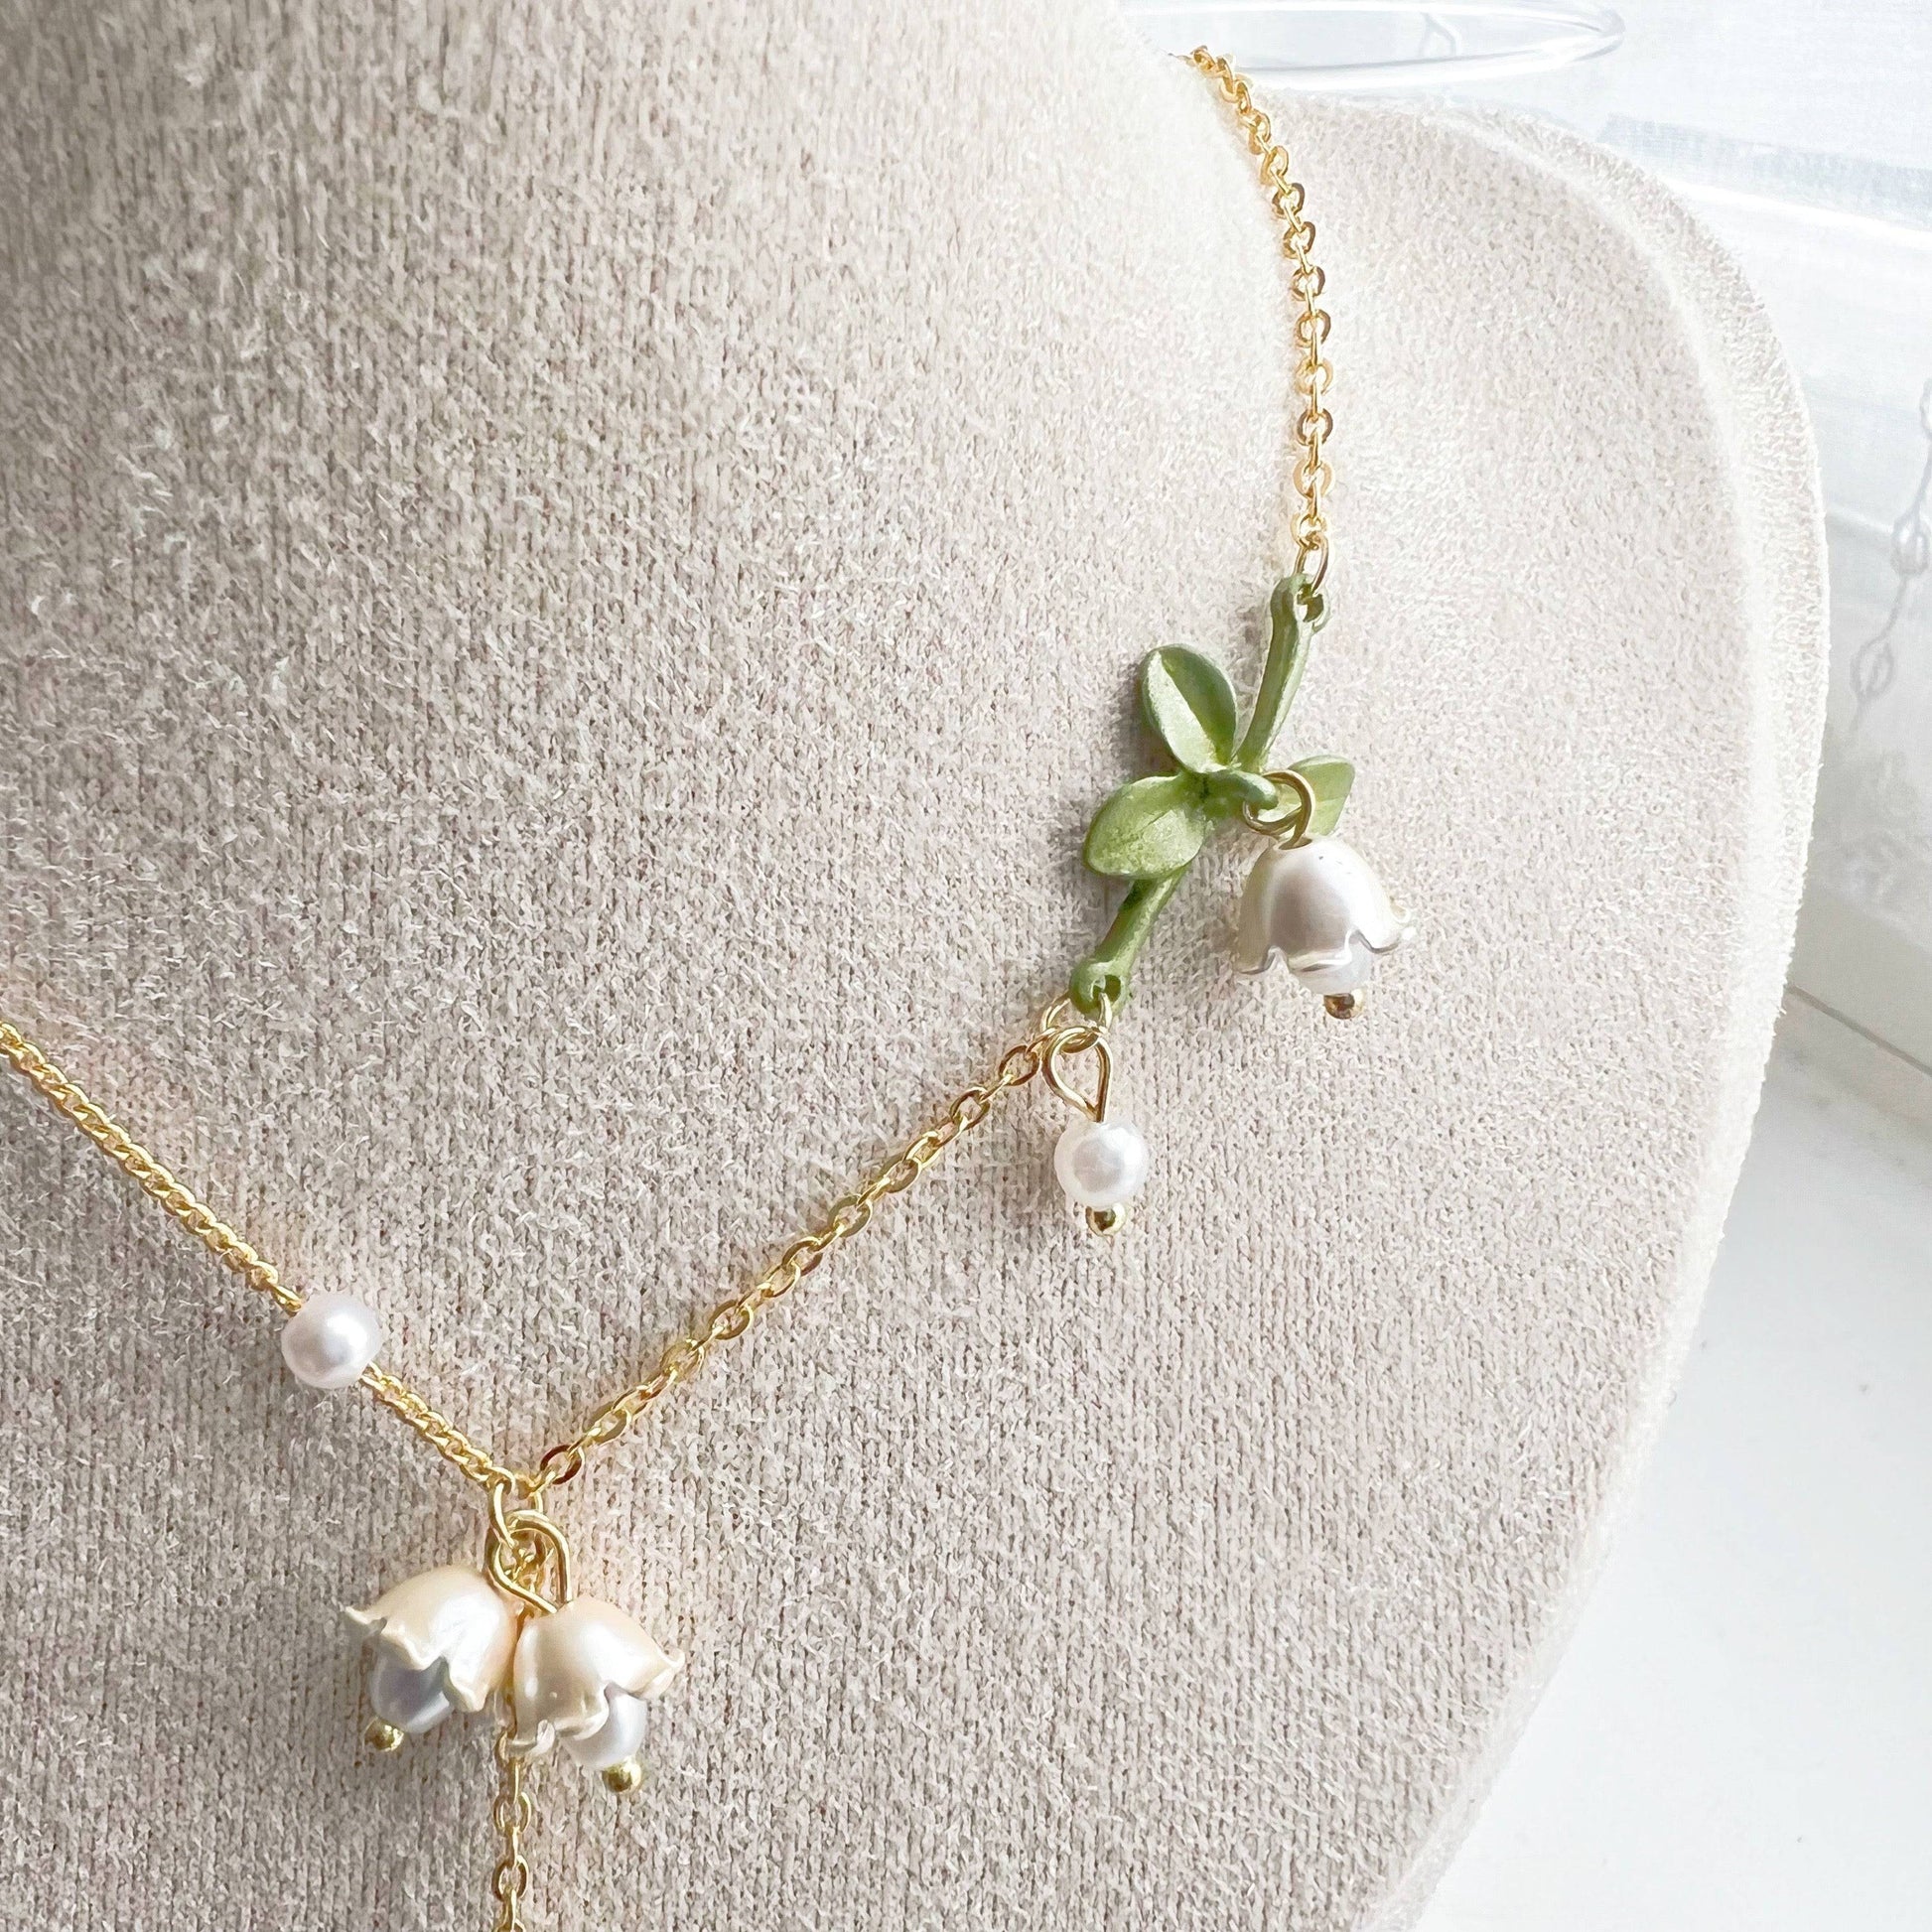 Bellflower Necklace - White Campanula Flower Necklace-Ninaouity